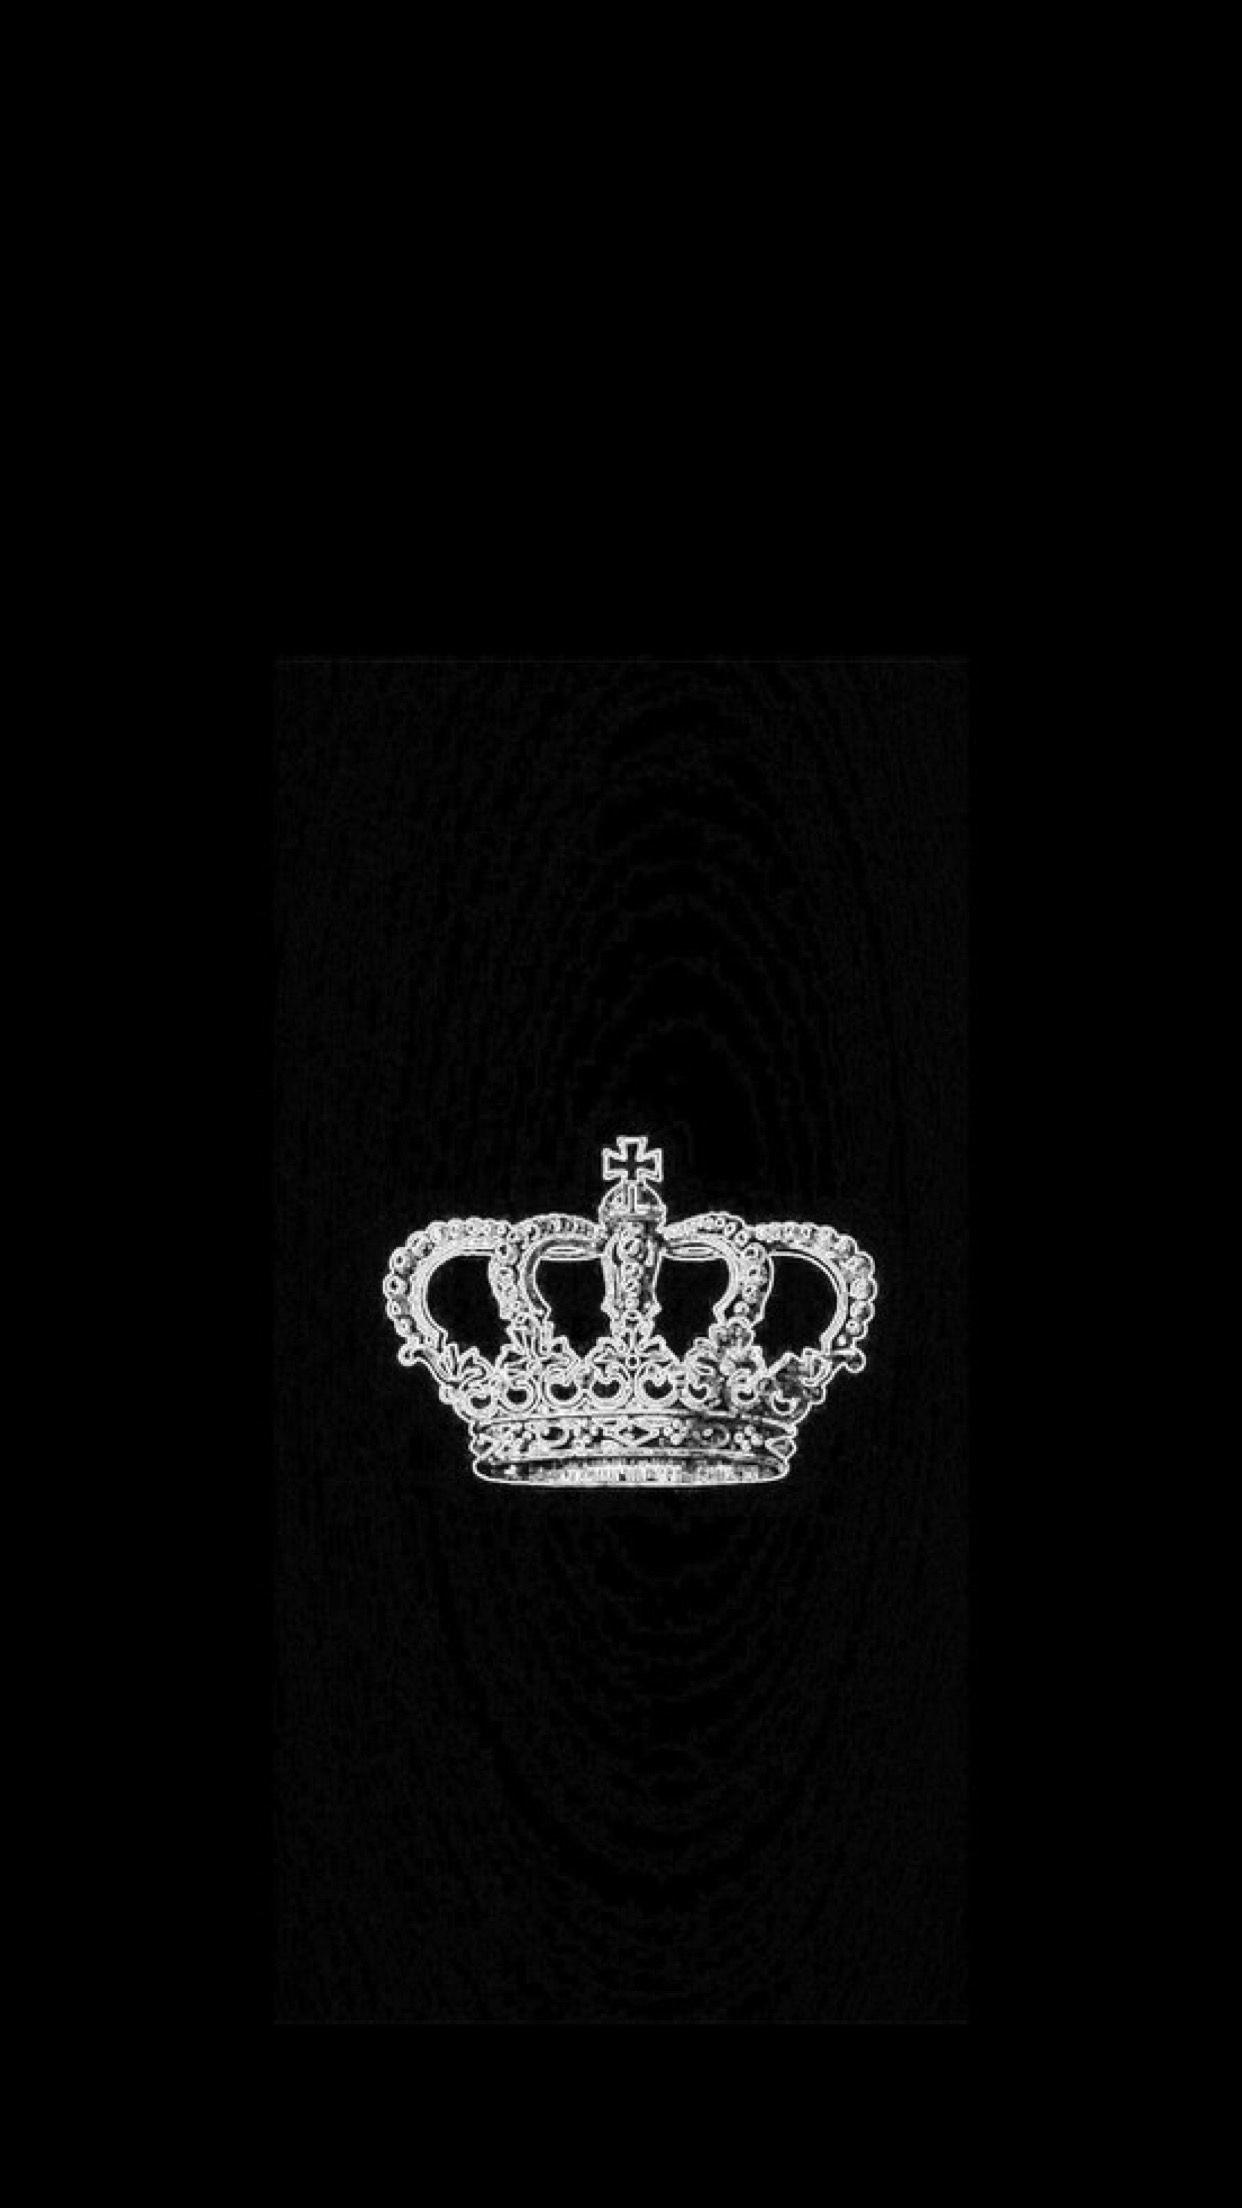 Crowns Wallpaper background picture